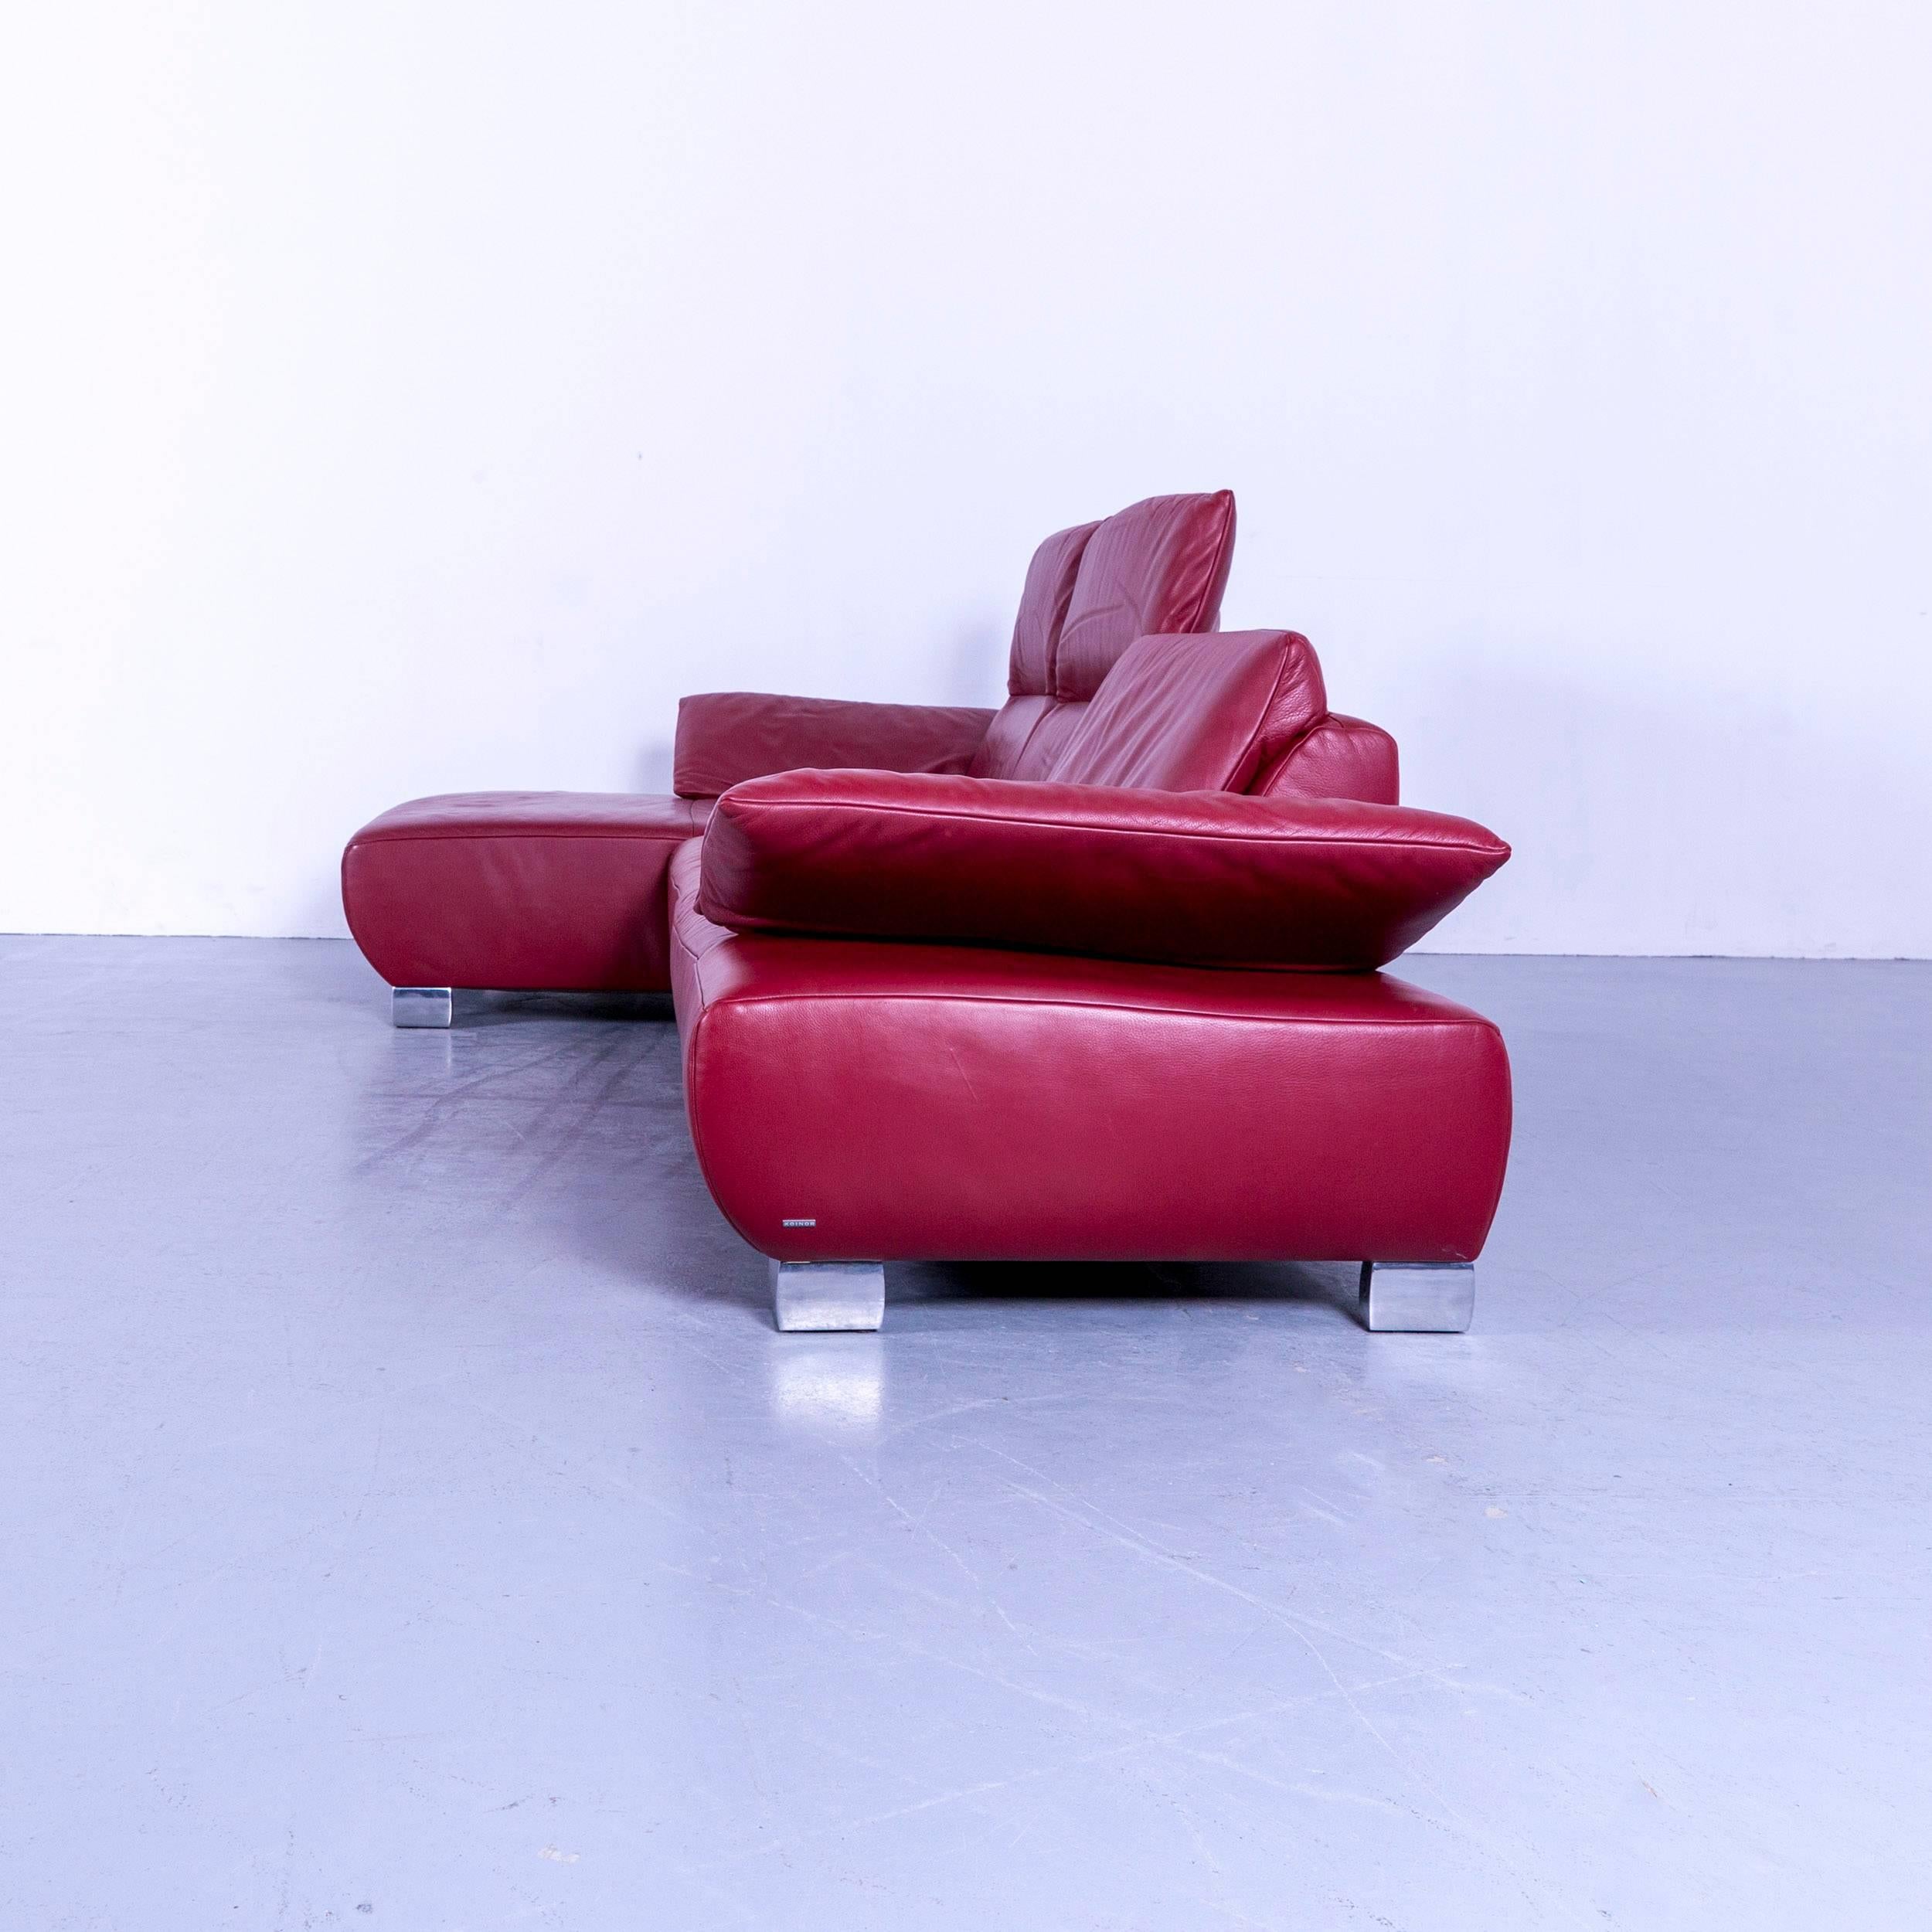 We offer delivery options to most destinations on earth. Find our shipping quotes at the bottom of this page in the shipping section.

An Koinor Volare Leather Corner Sofa Red Function

Shipping:

An on point shipping process is our priority. 

For